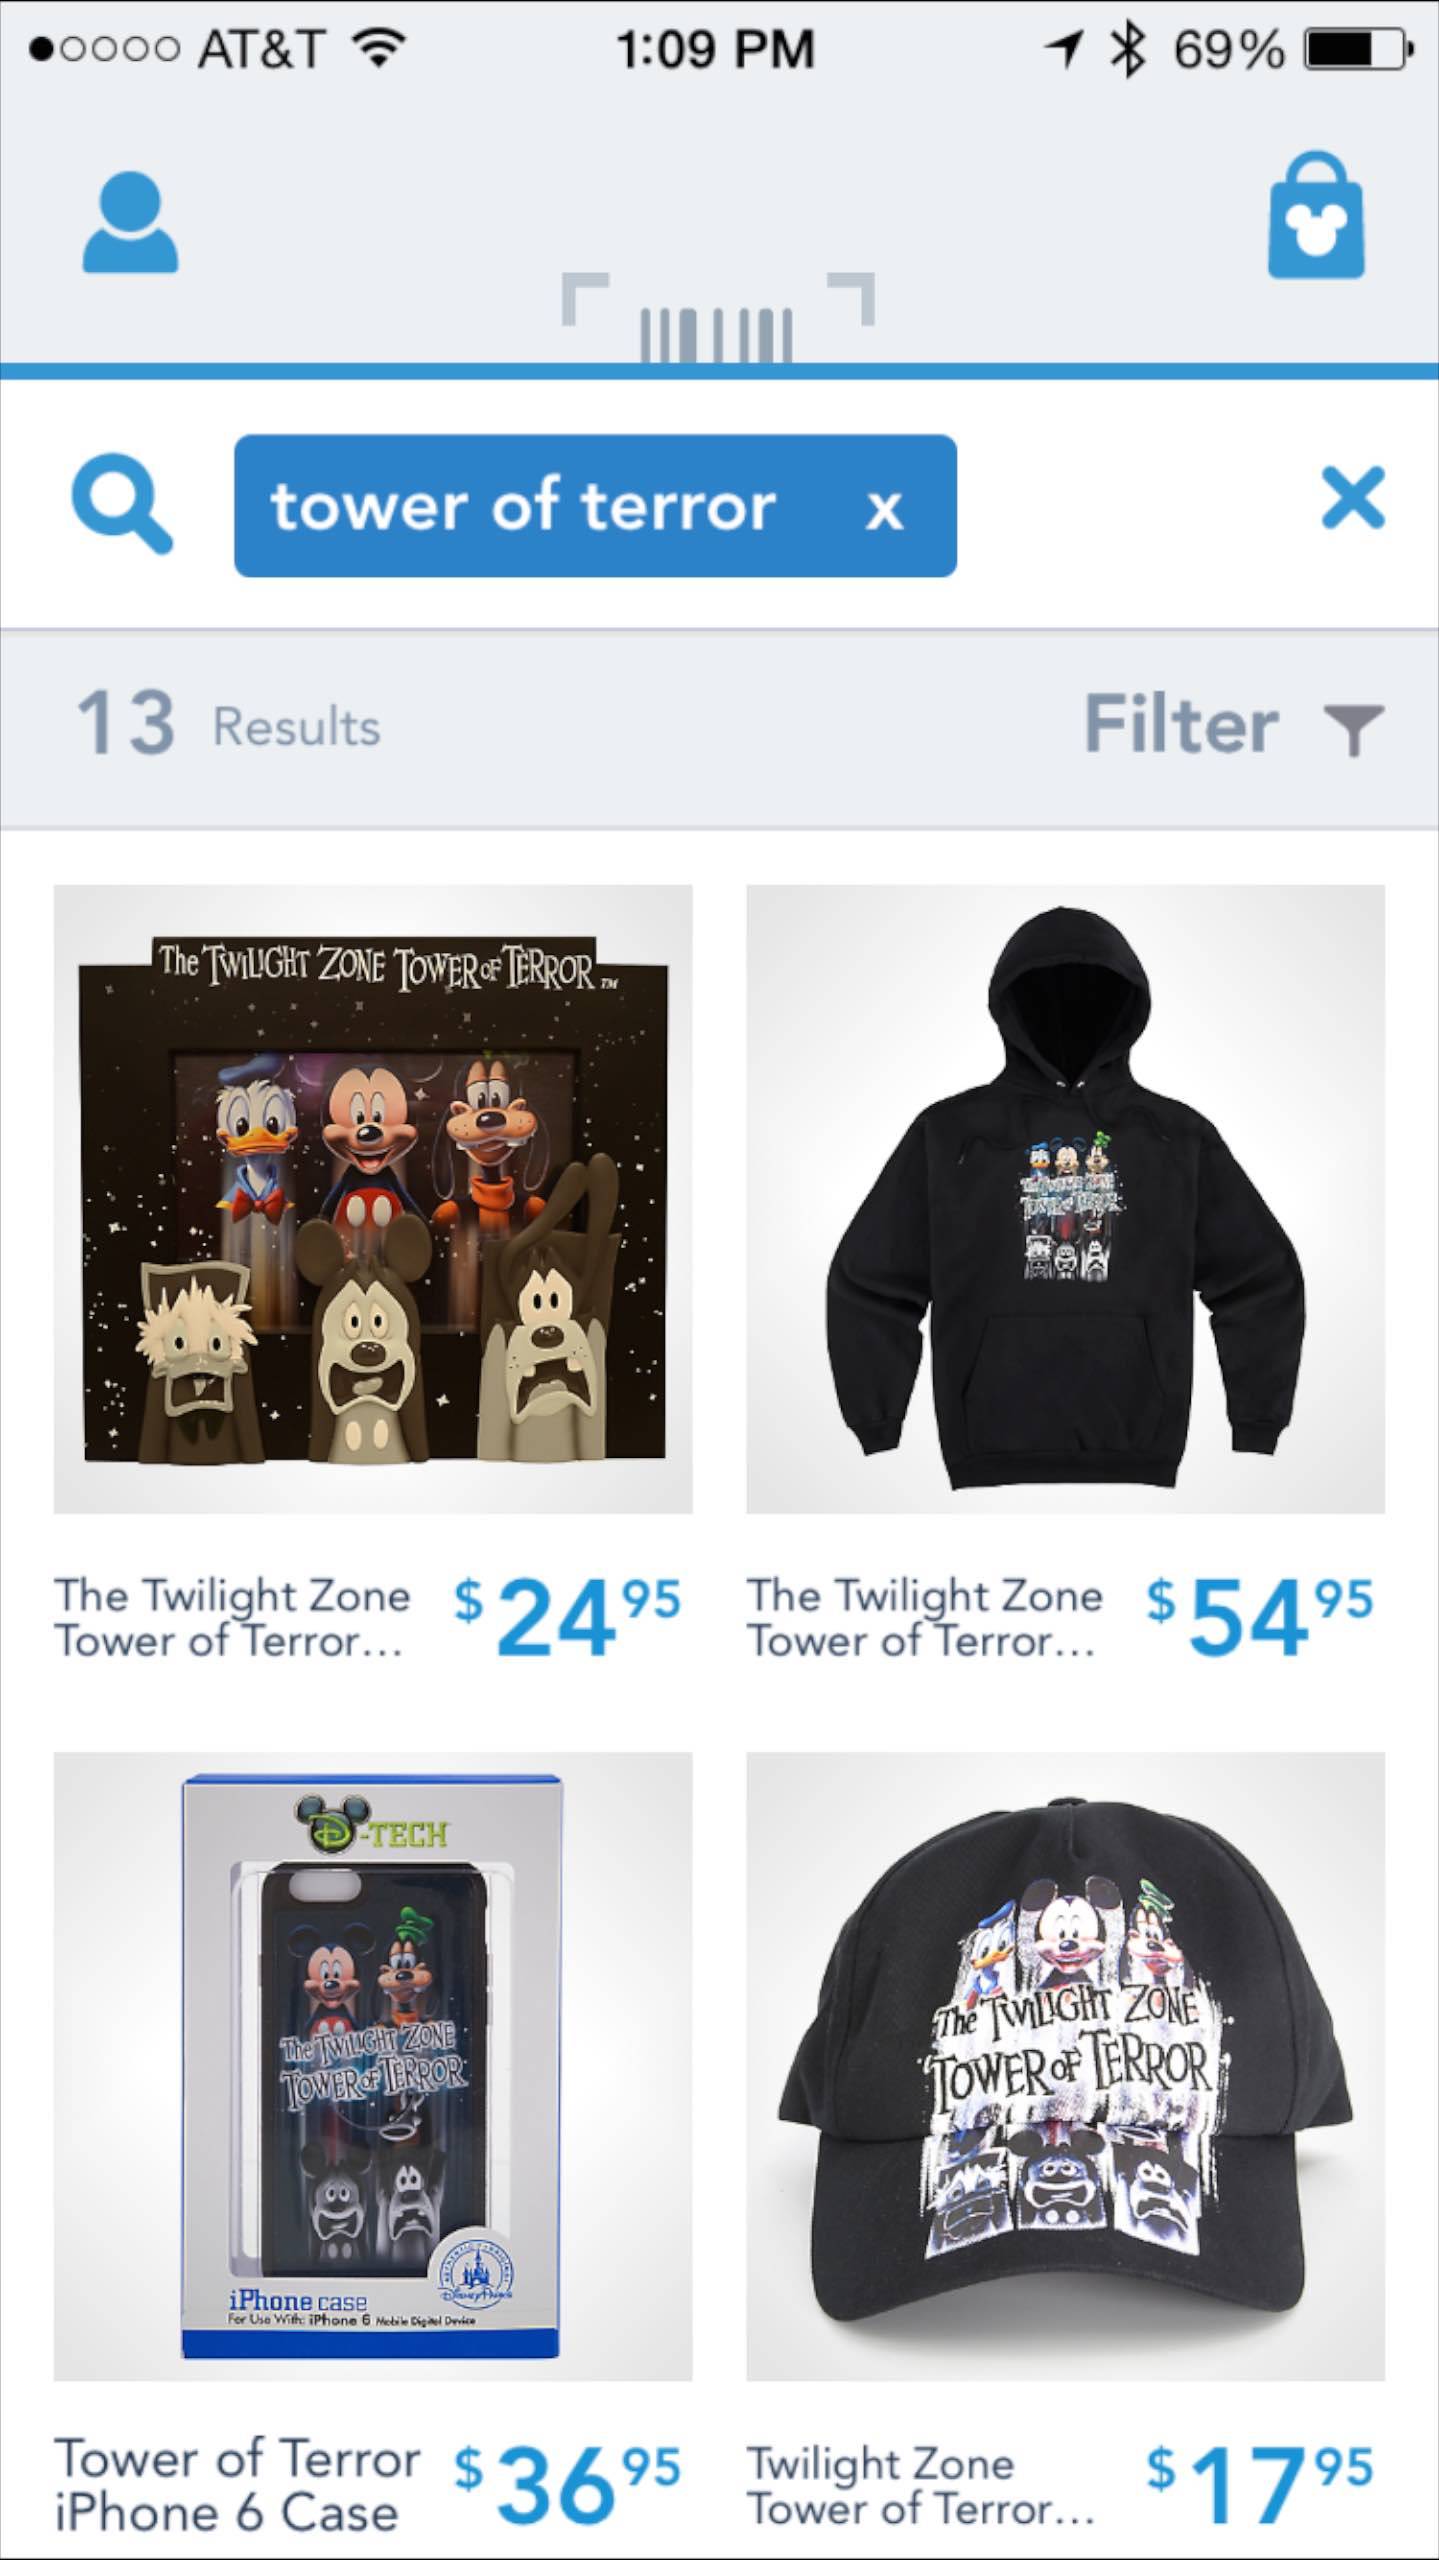 Shop Disney Parks app - Search for Tower of Terror